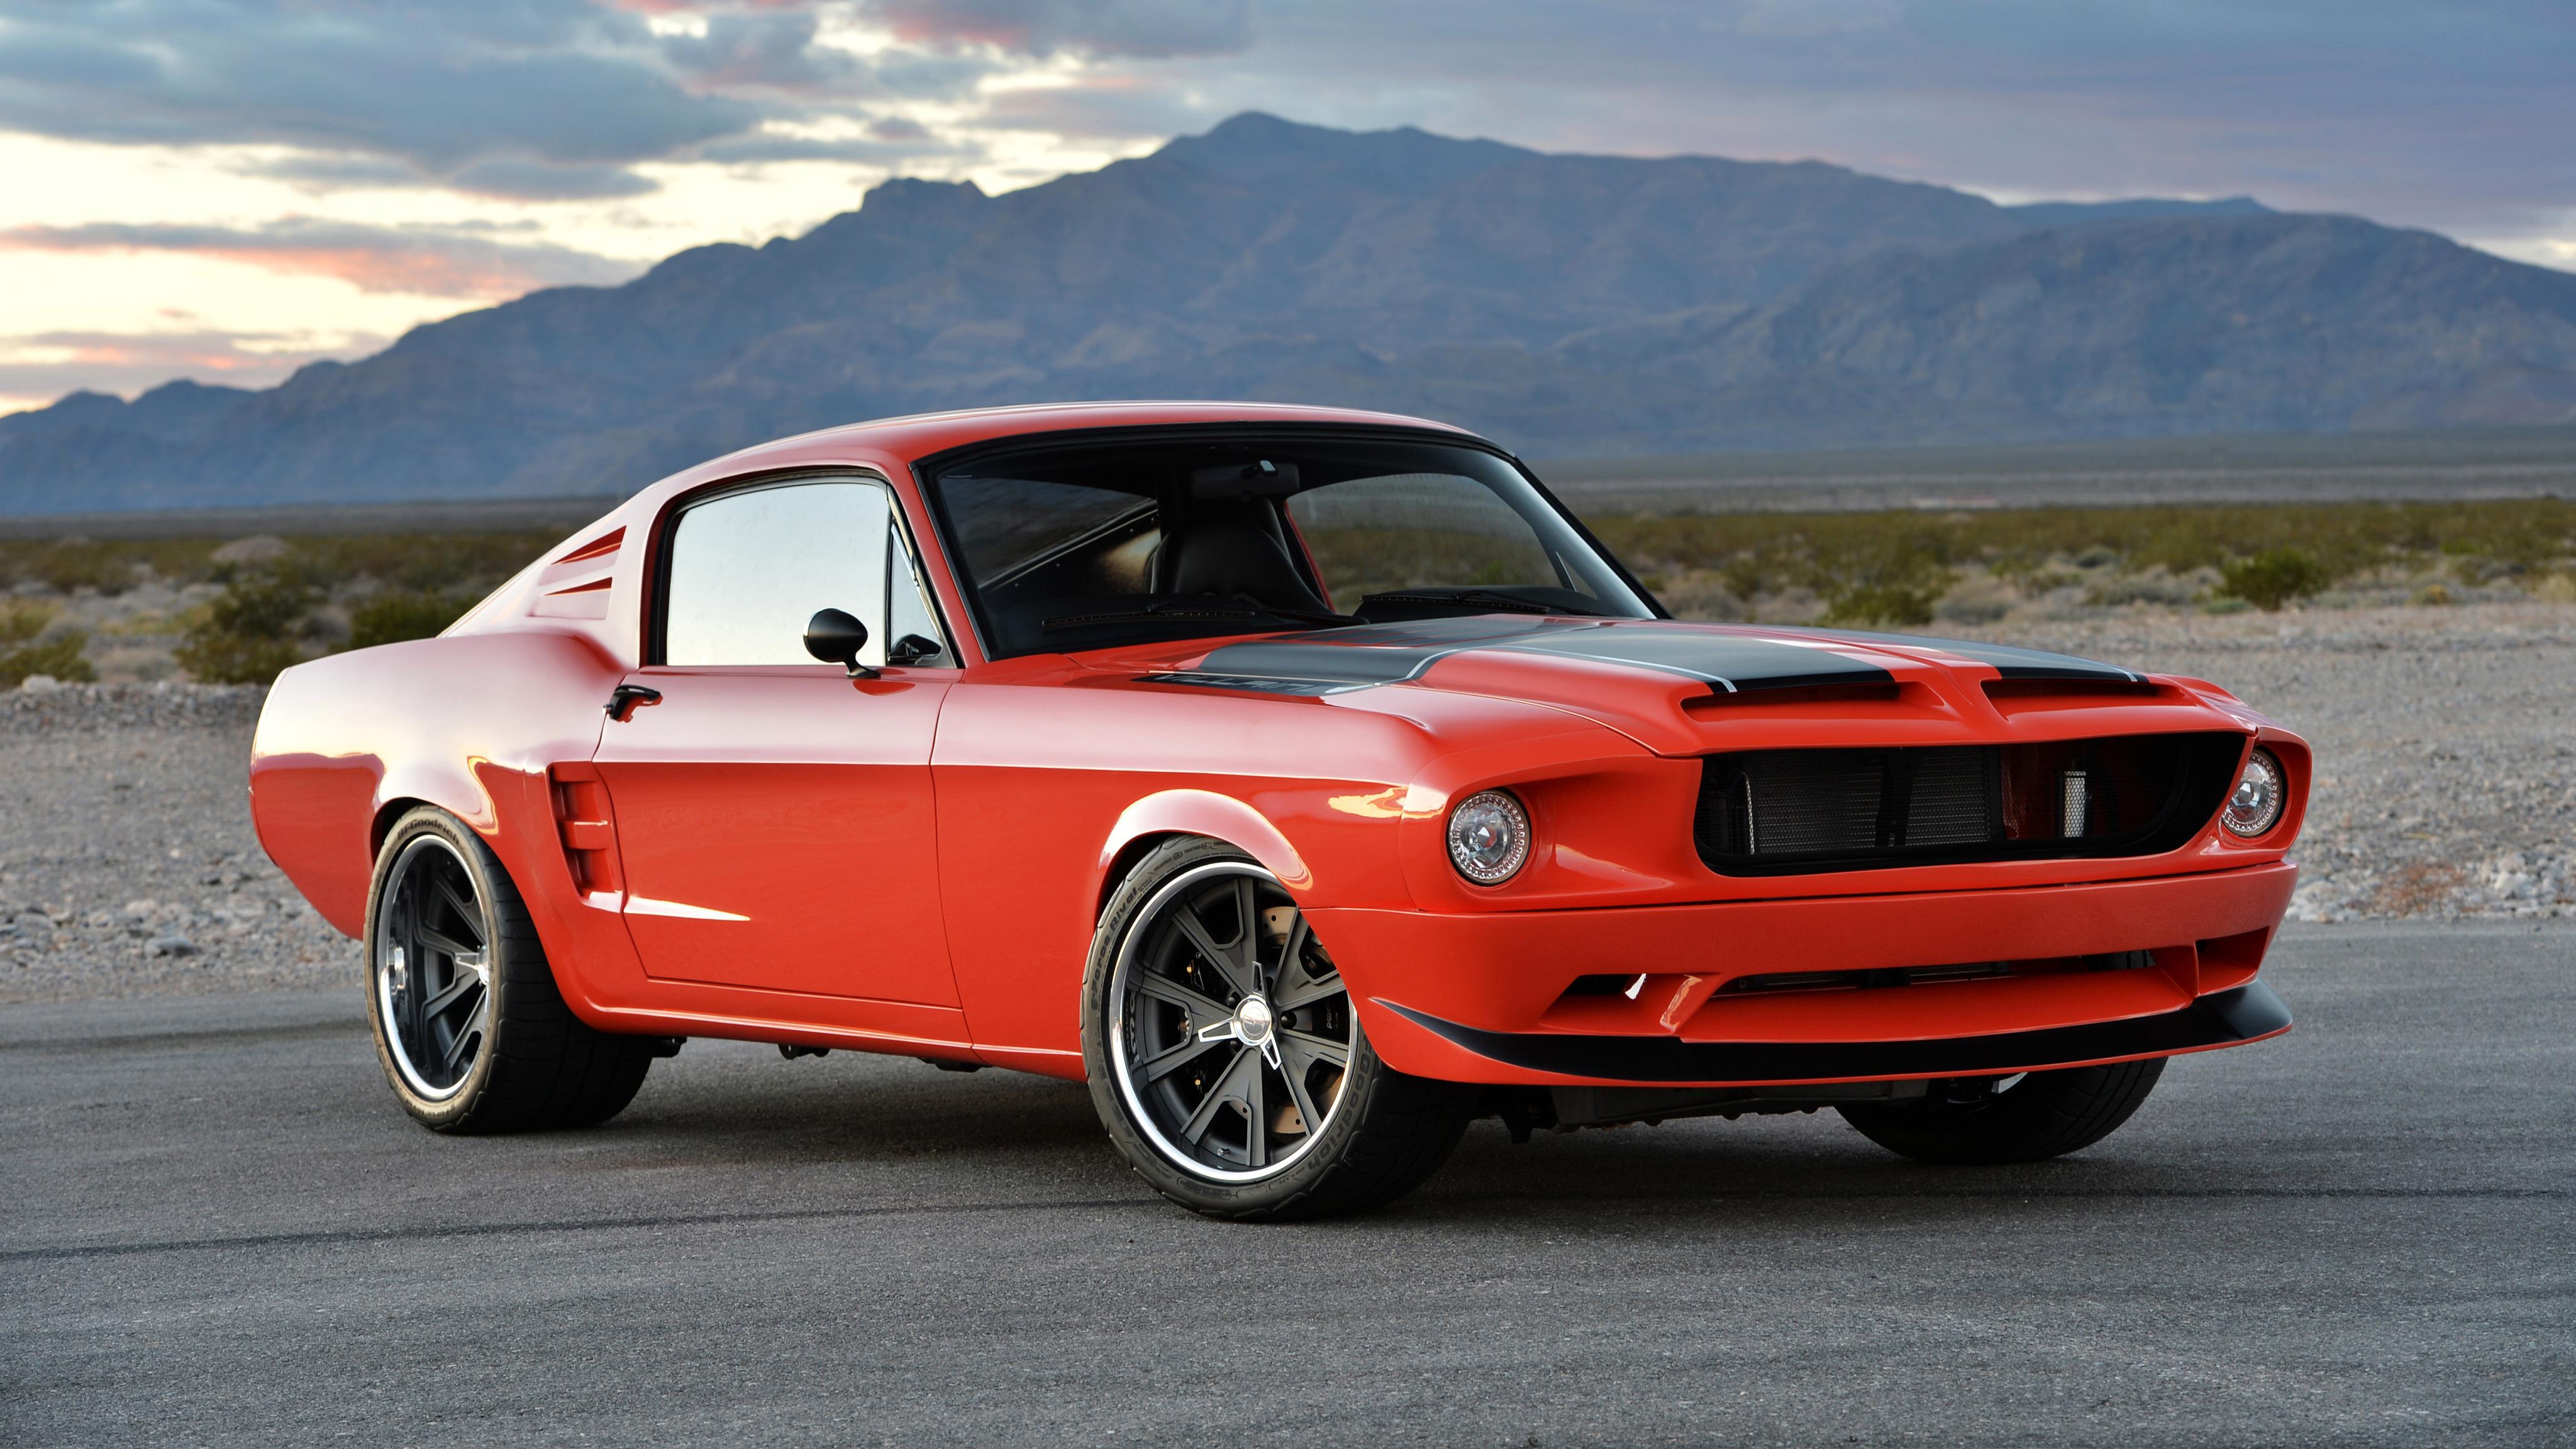 Ford Mustang Fastback Wallpaper and Background Image